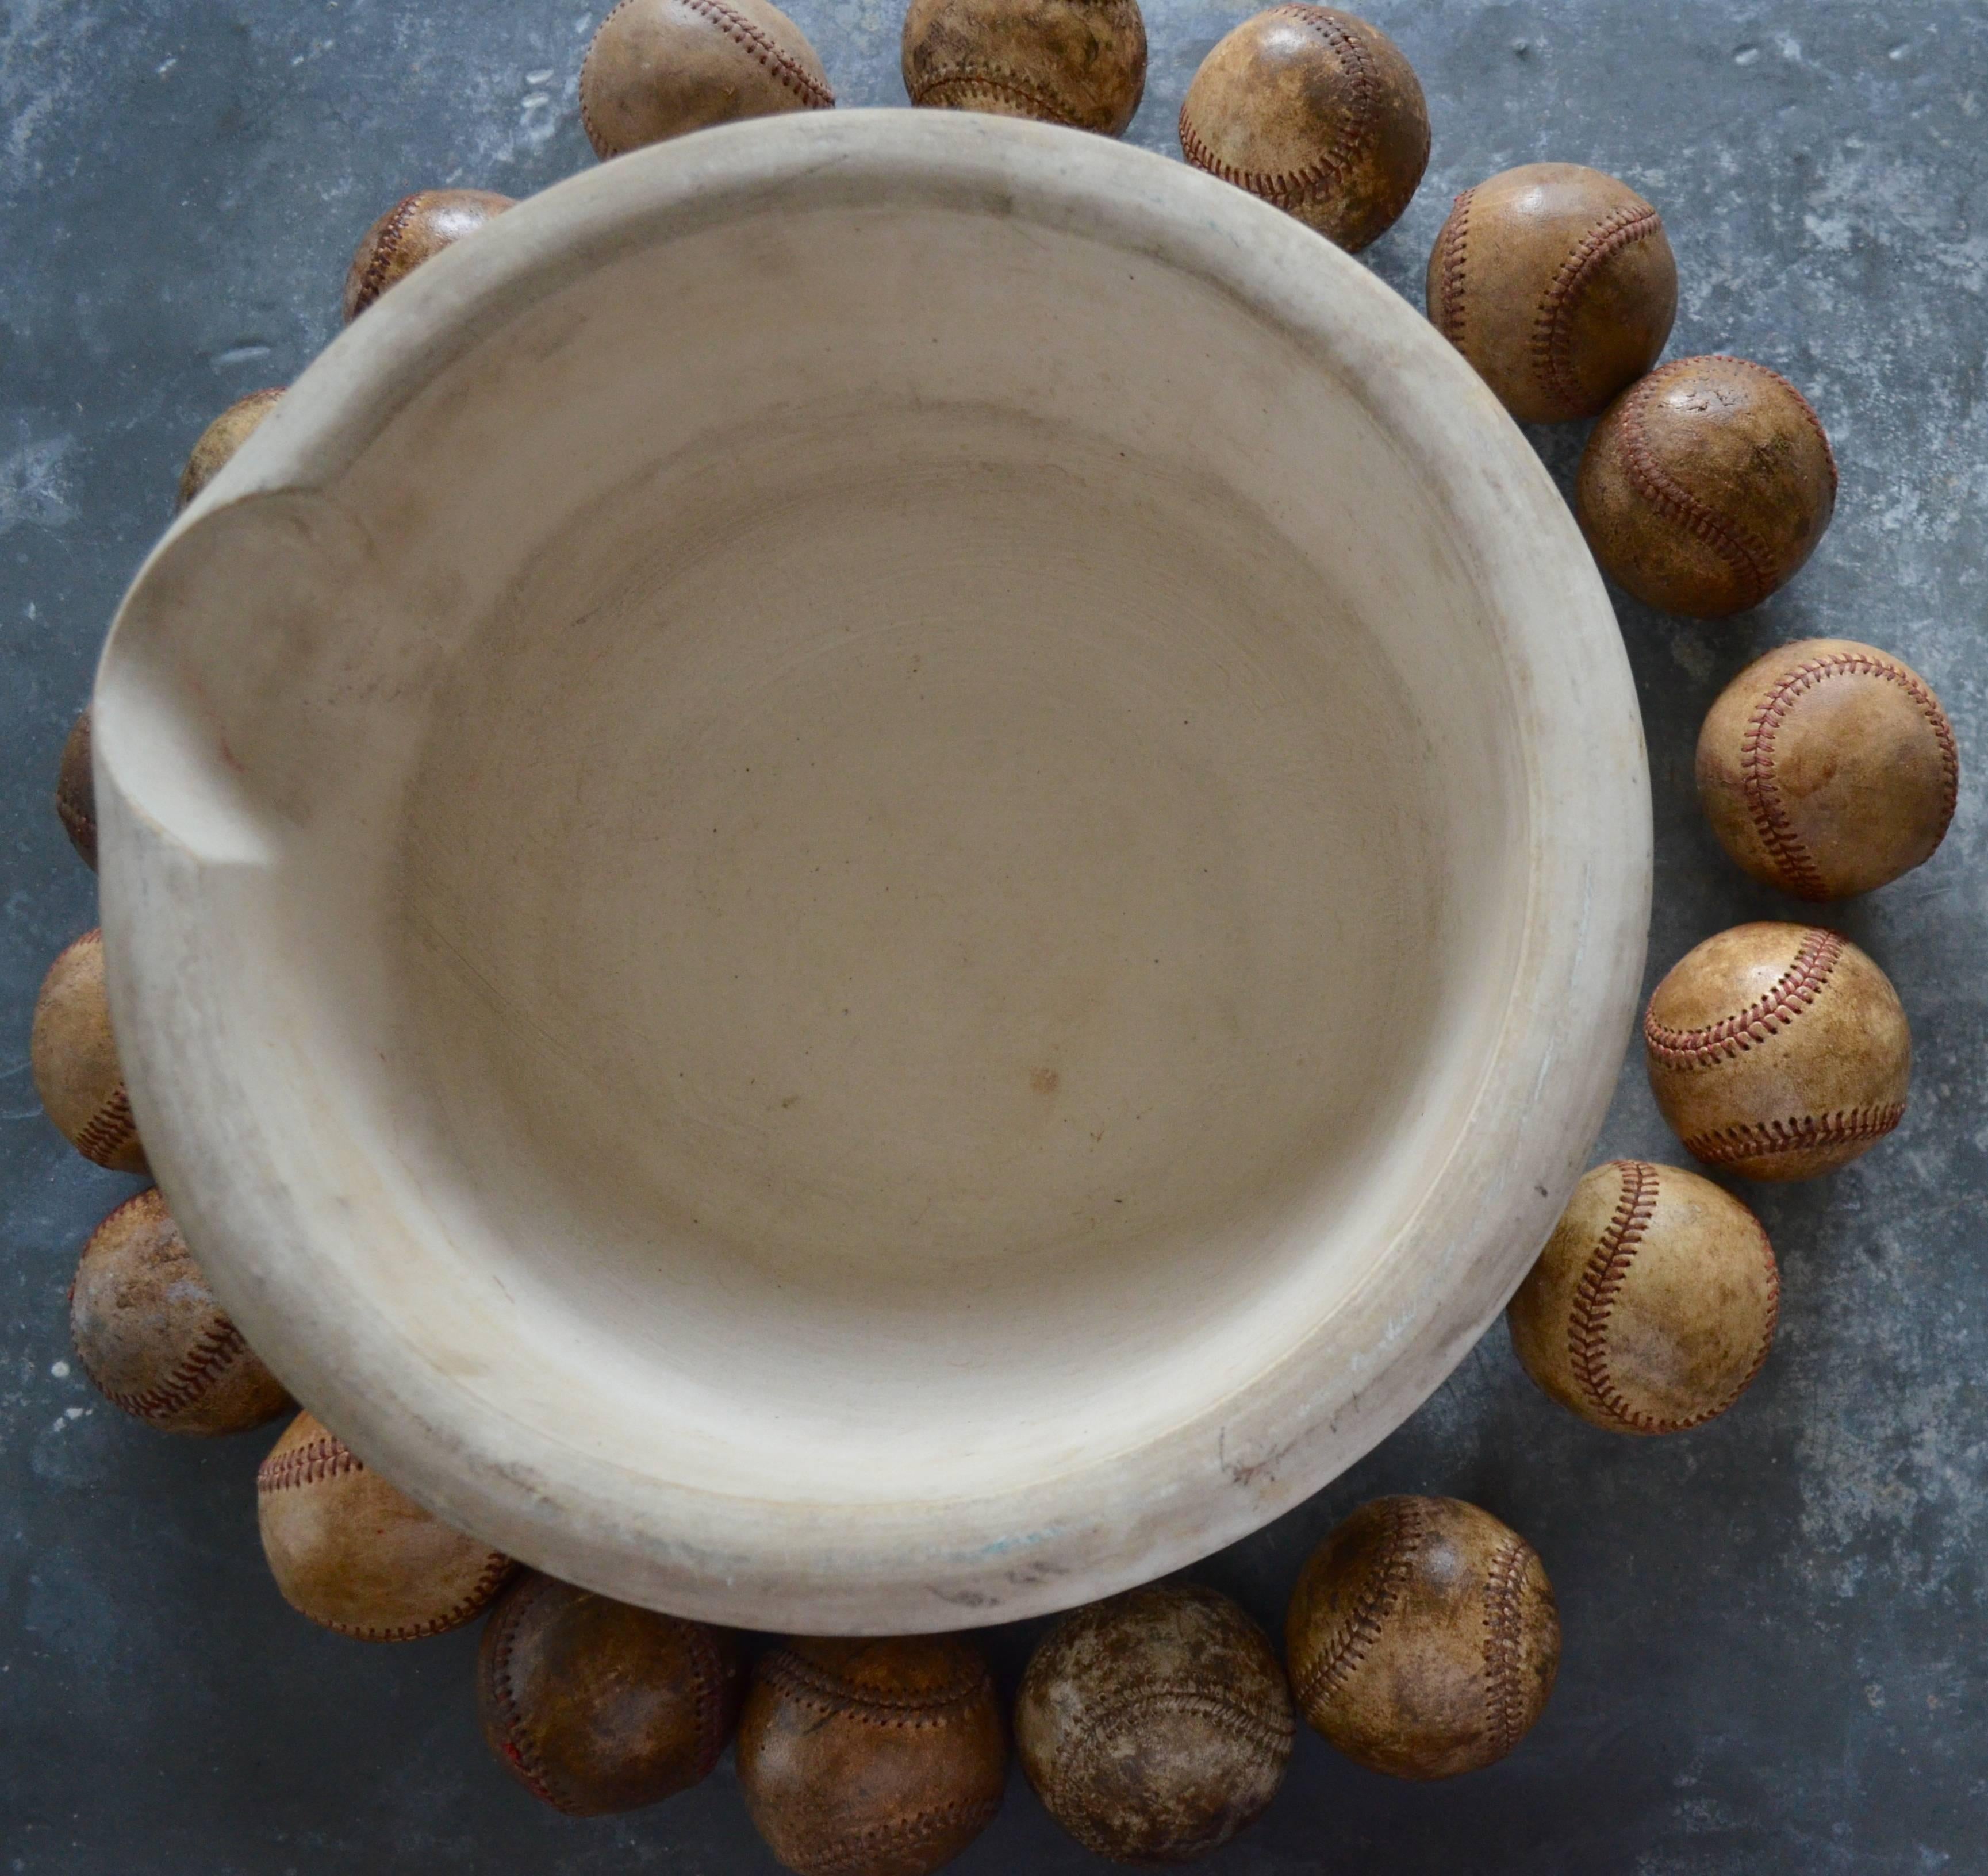 20th Century Mortar Bowl of Antique Stone with Display of Well-Worn Baseballs